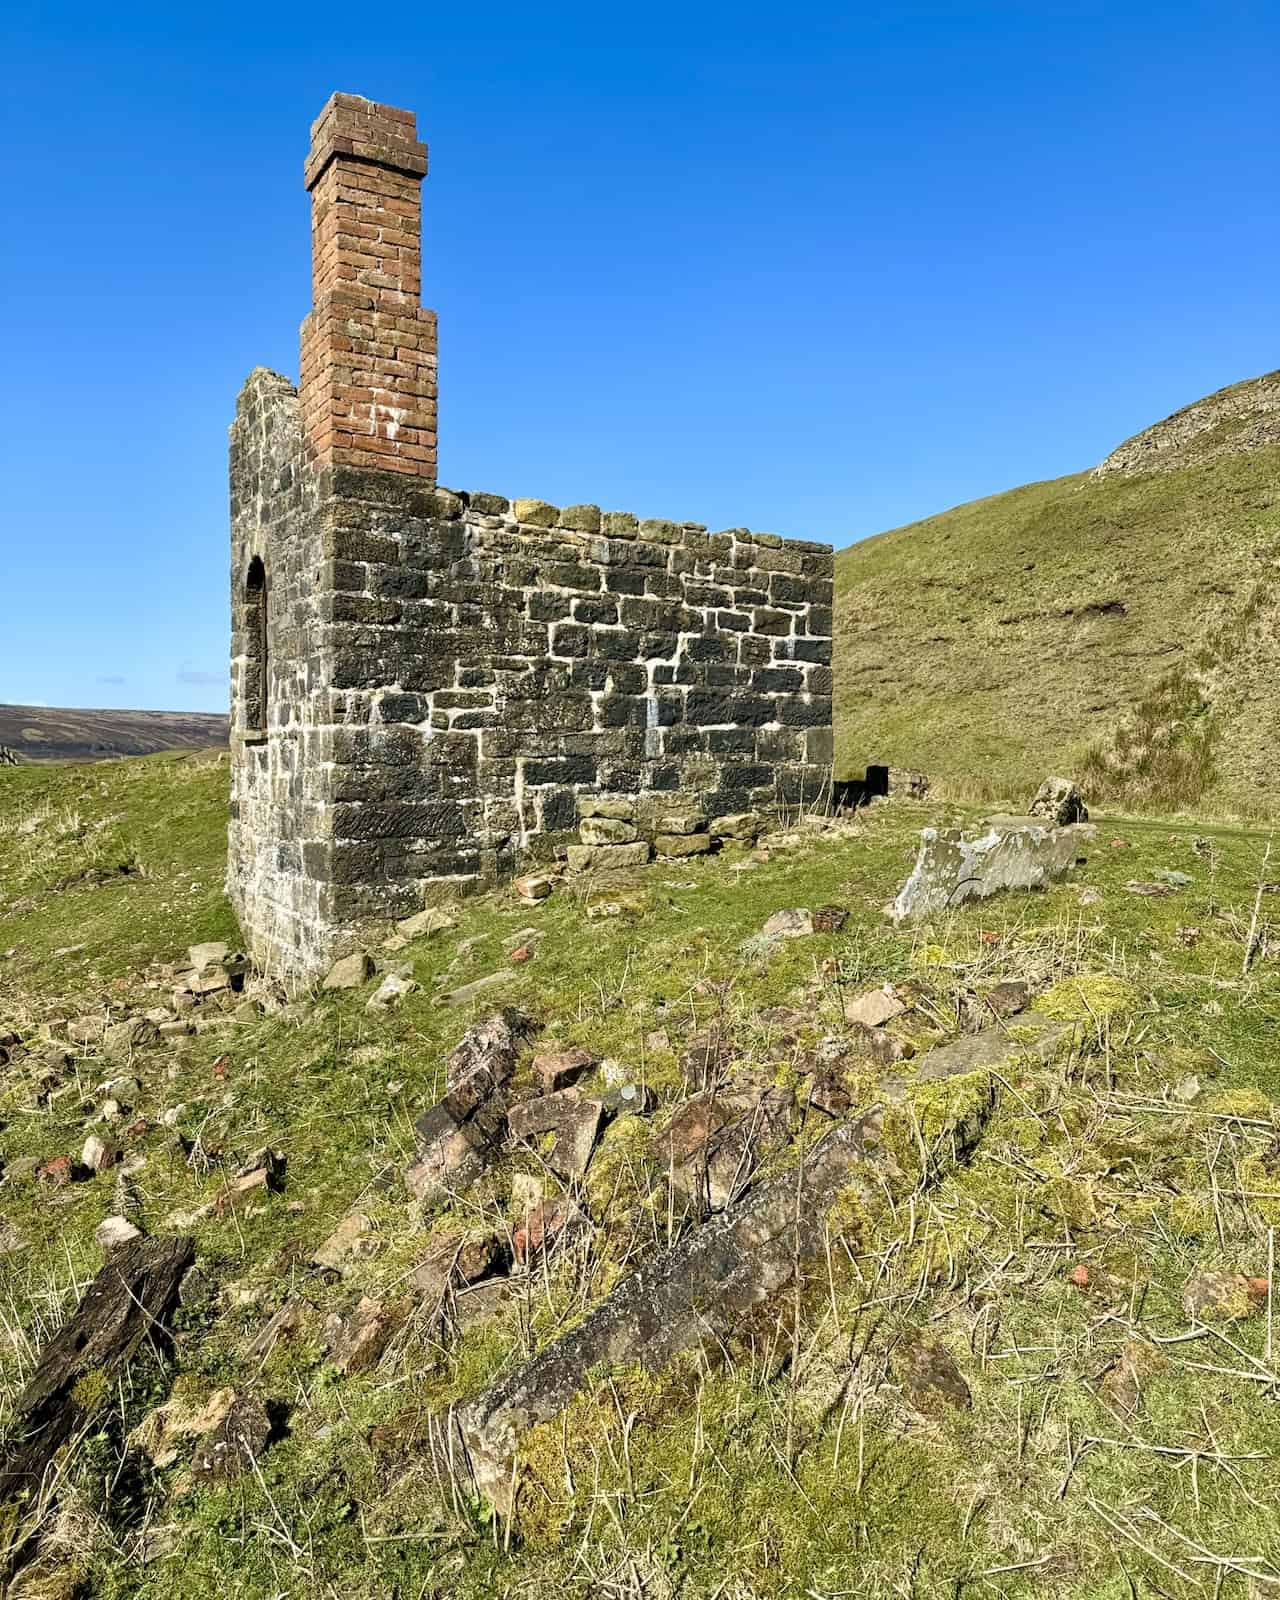 The remains of ‘Black Houses’ cottages near the Iron Kilns are observed. These cottages acquired their name from being formerly painted with weatherproofing black tar.